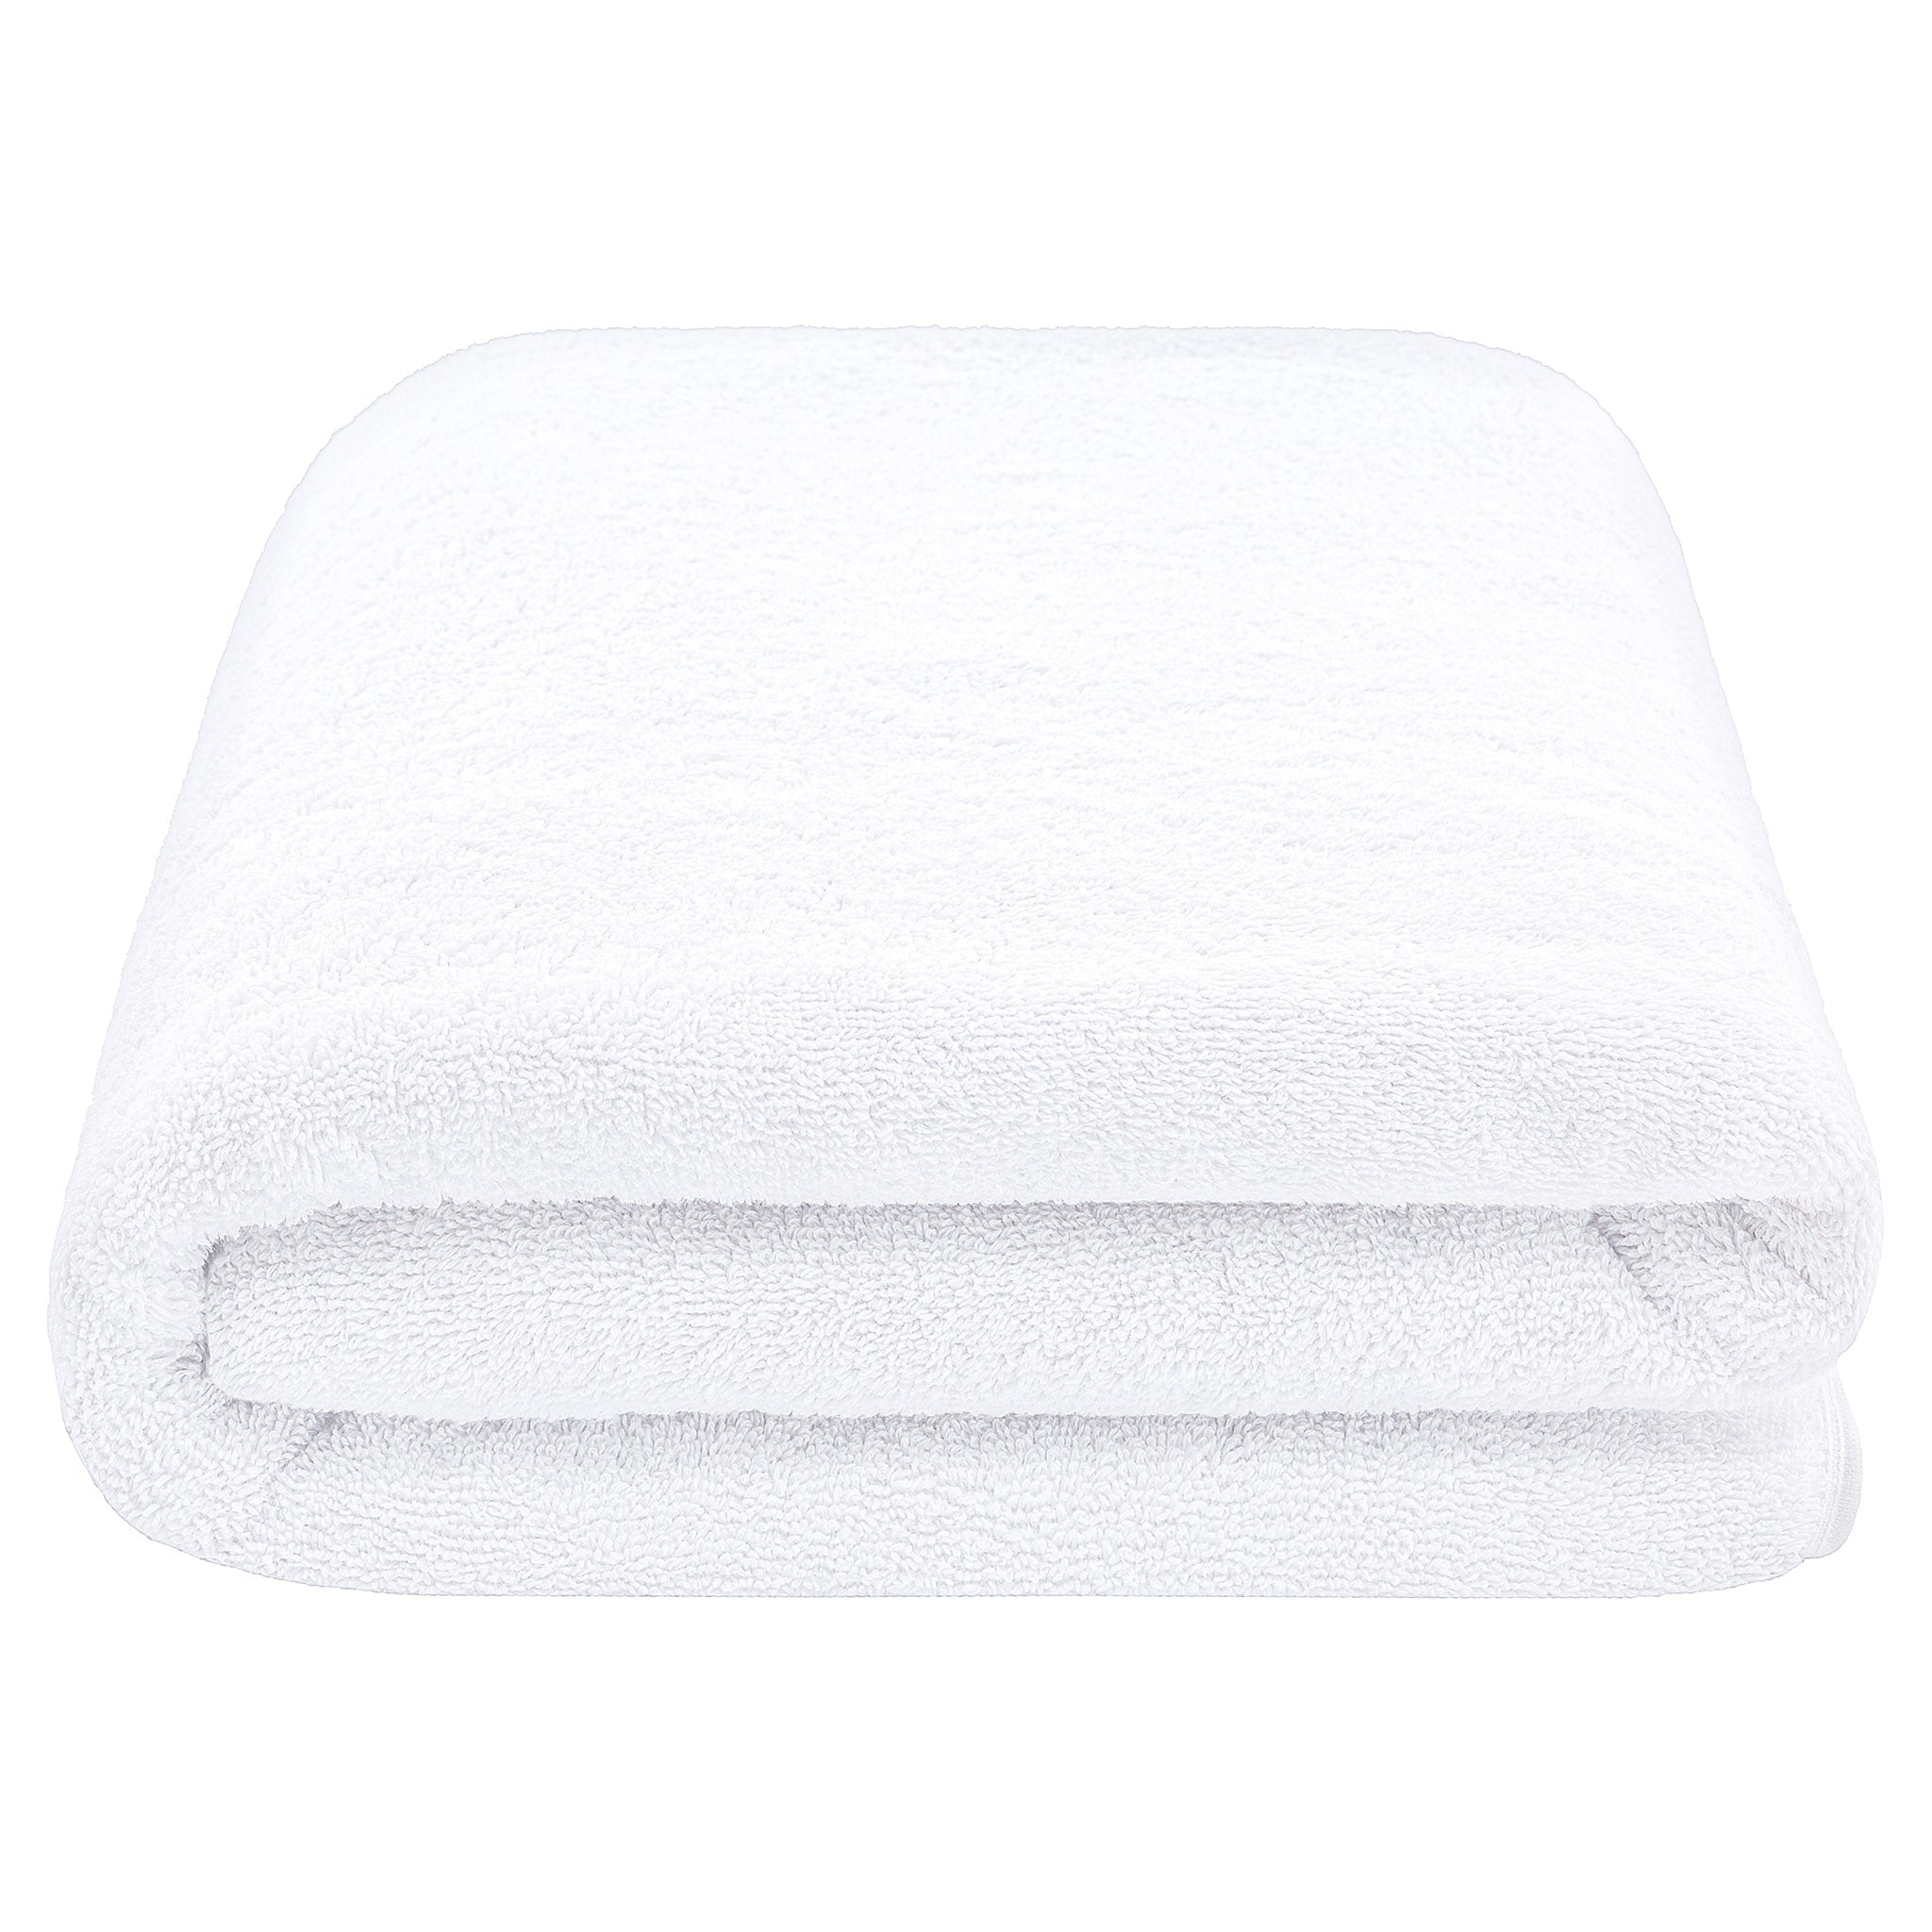 American Soft Linen 100% Ring Spun Cotton 40x80 Inches Oversized Bath Sheets white-3